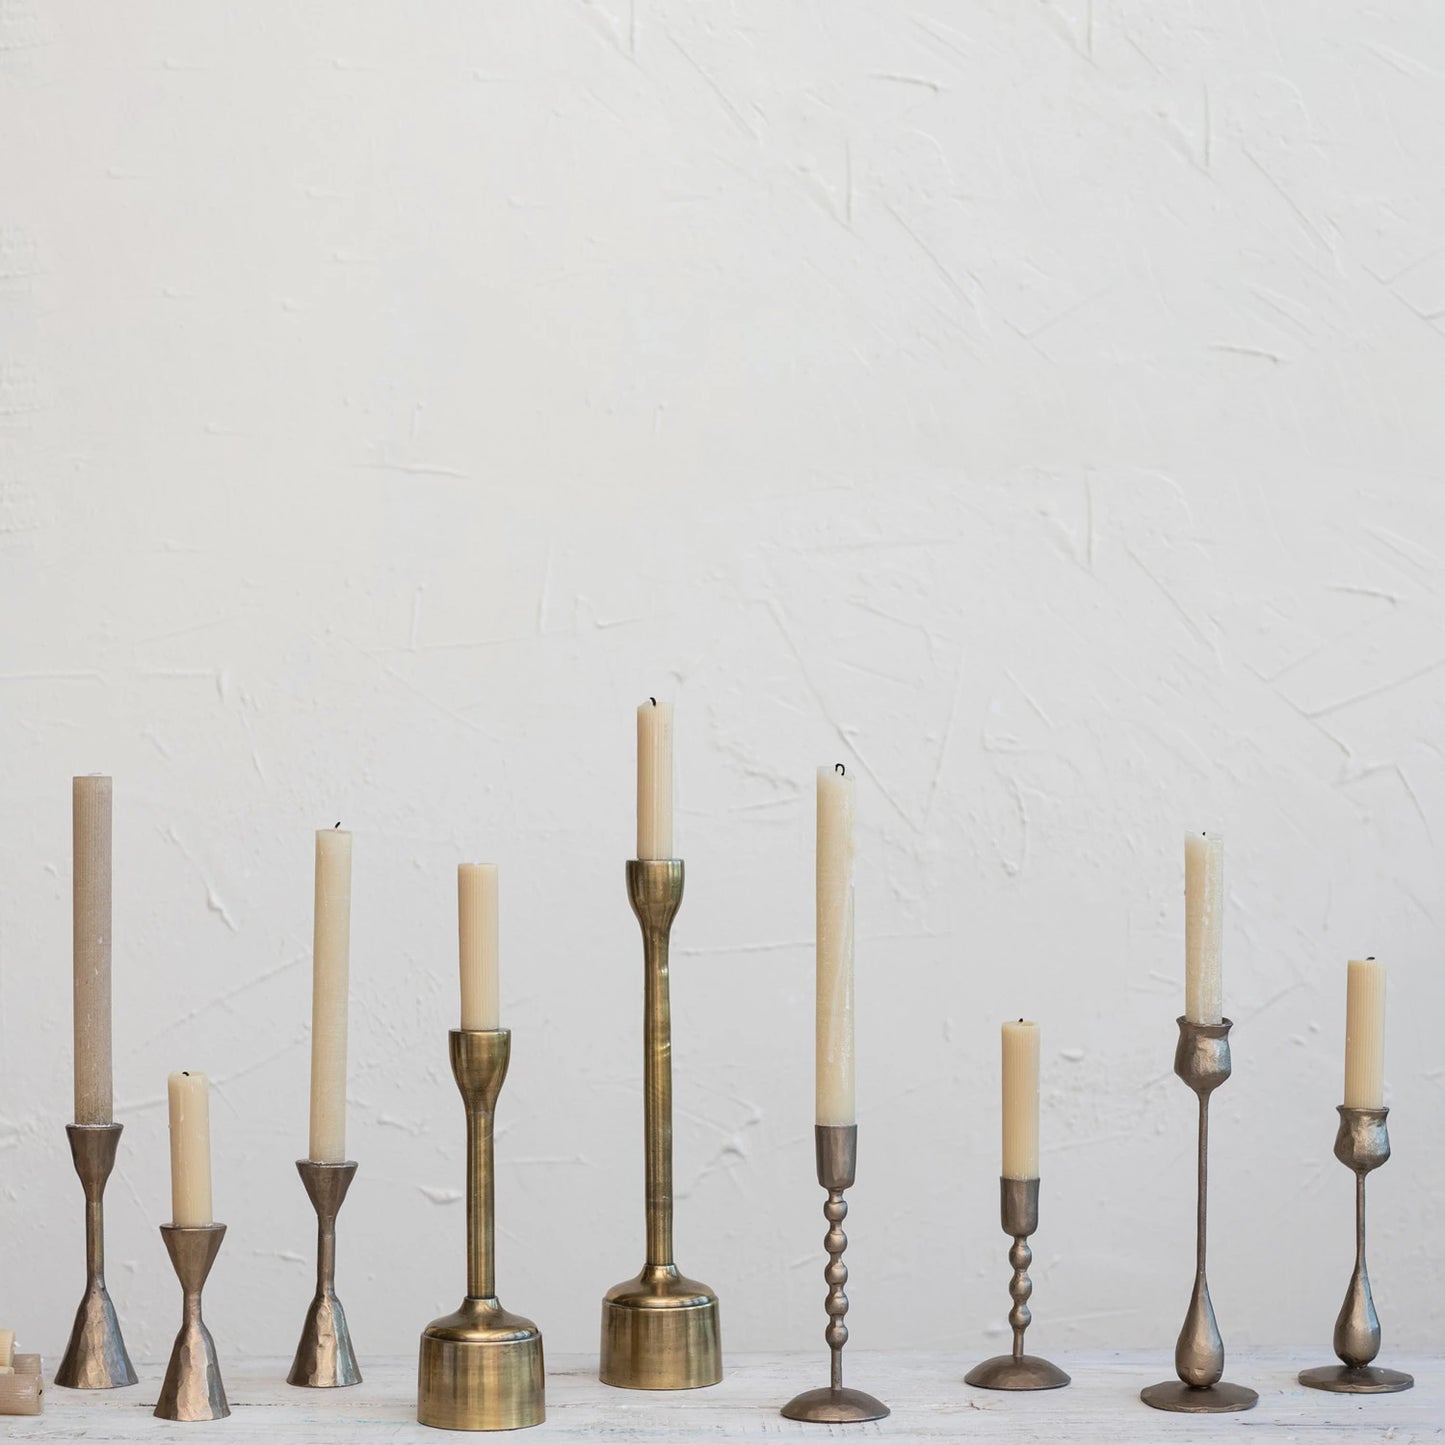 assorted brass candle sticks with cream taper candles in them with an off-white plaster background.